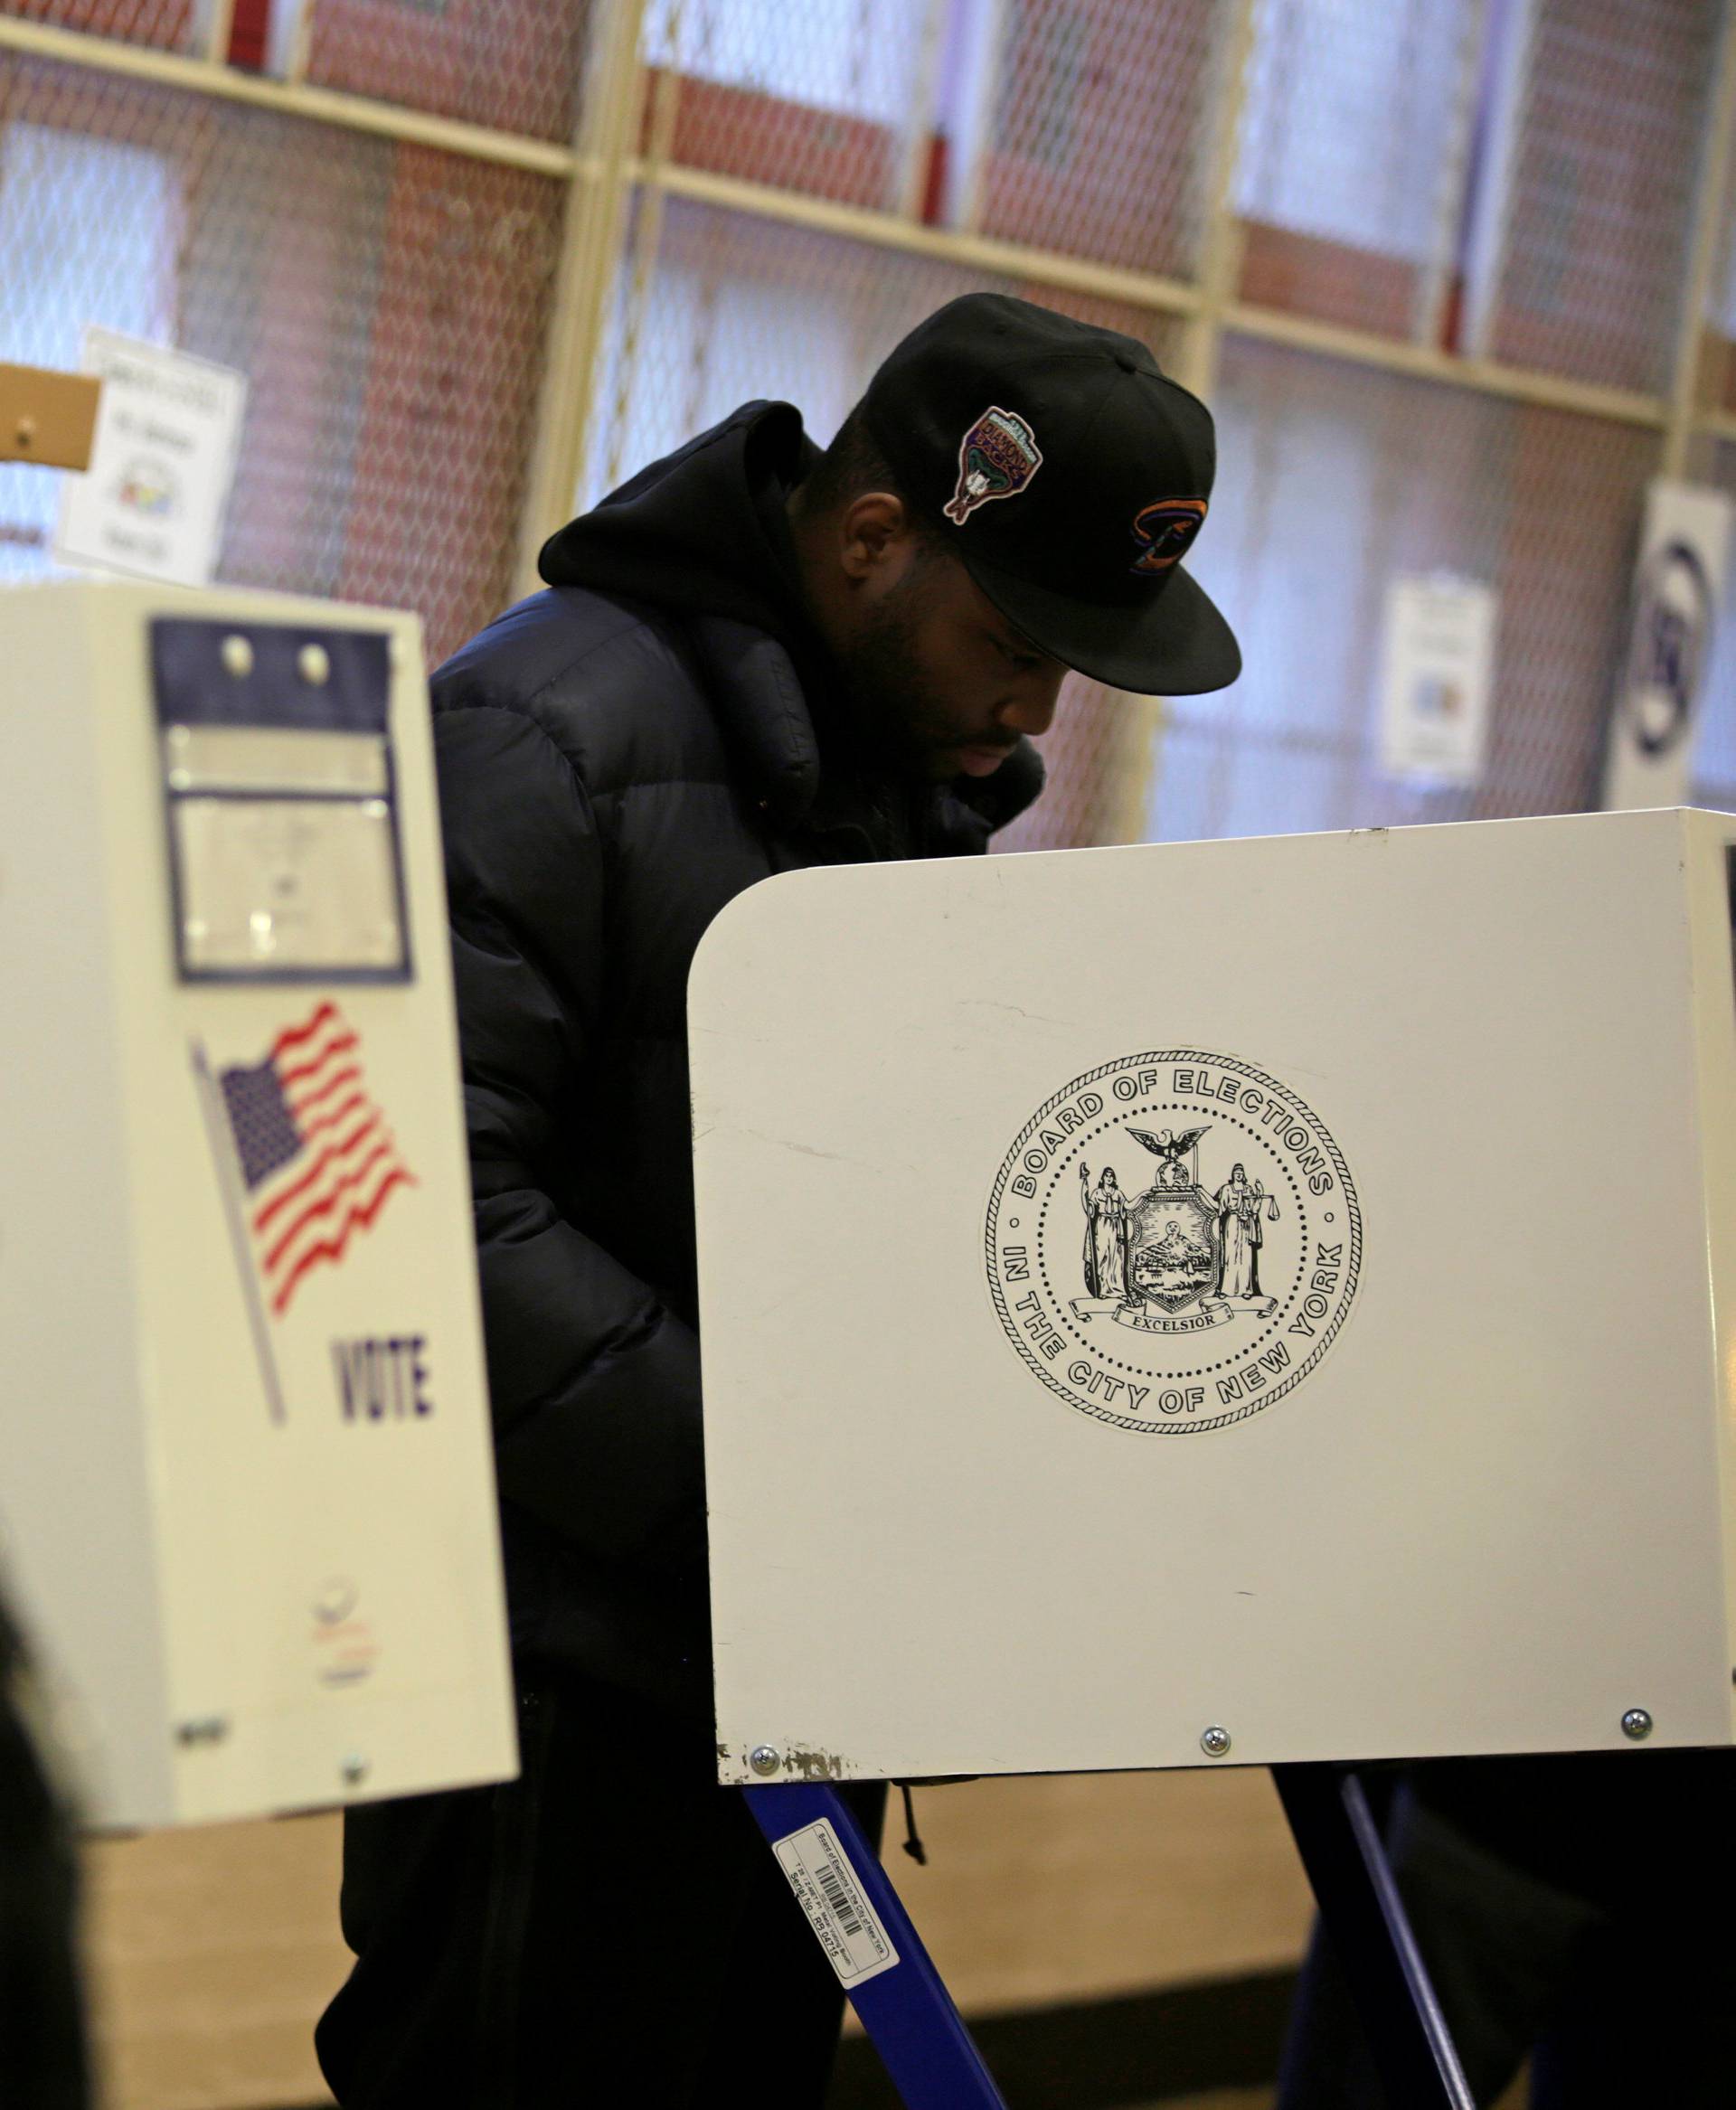 A voter casts his ballot behind a ballot booth during the U.S. presidential election at a polling station in the Bronx Borough of New York